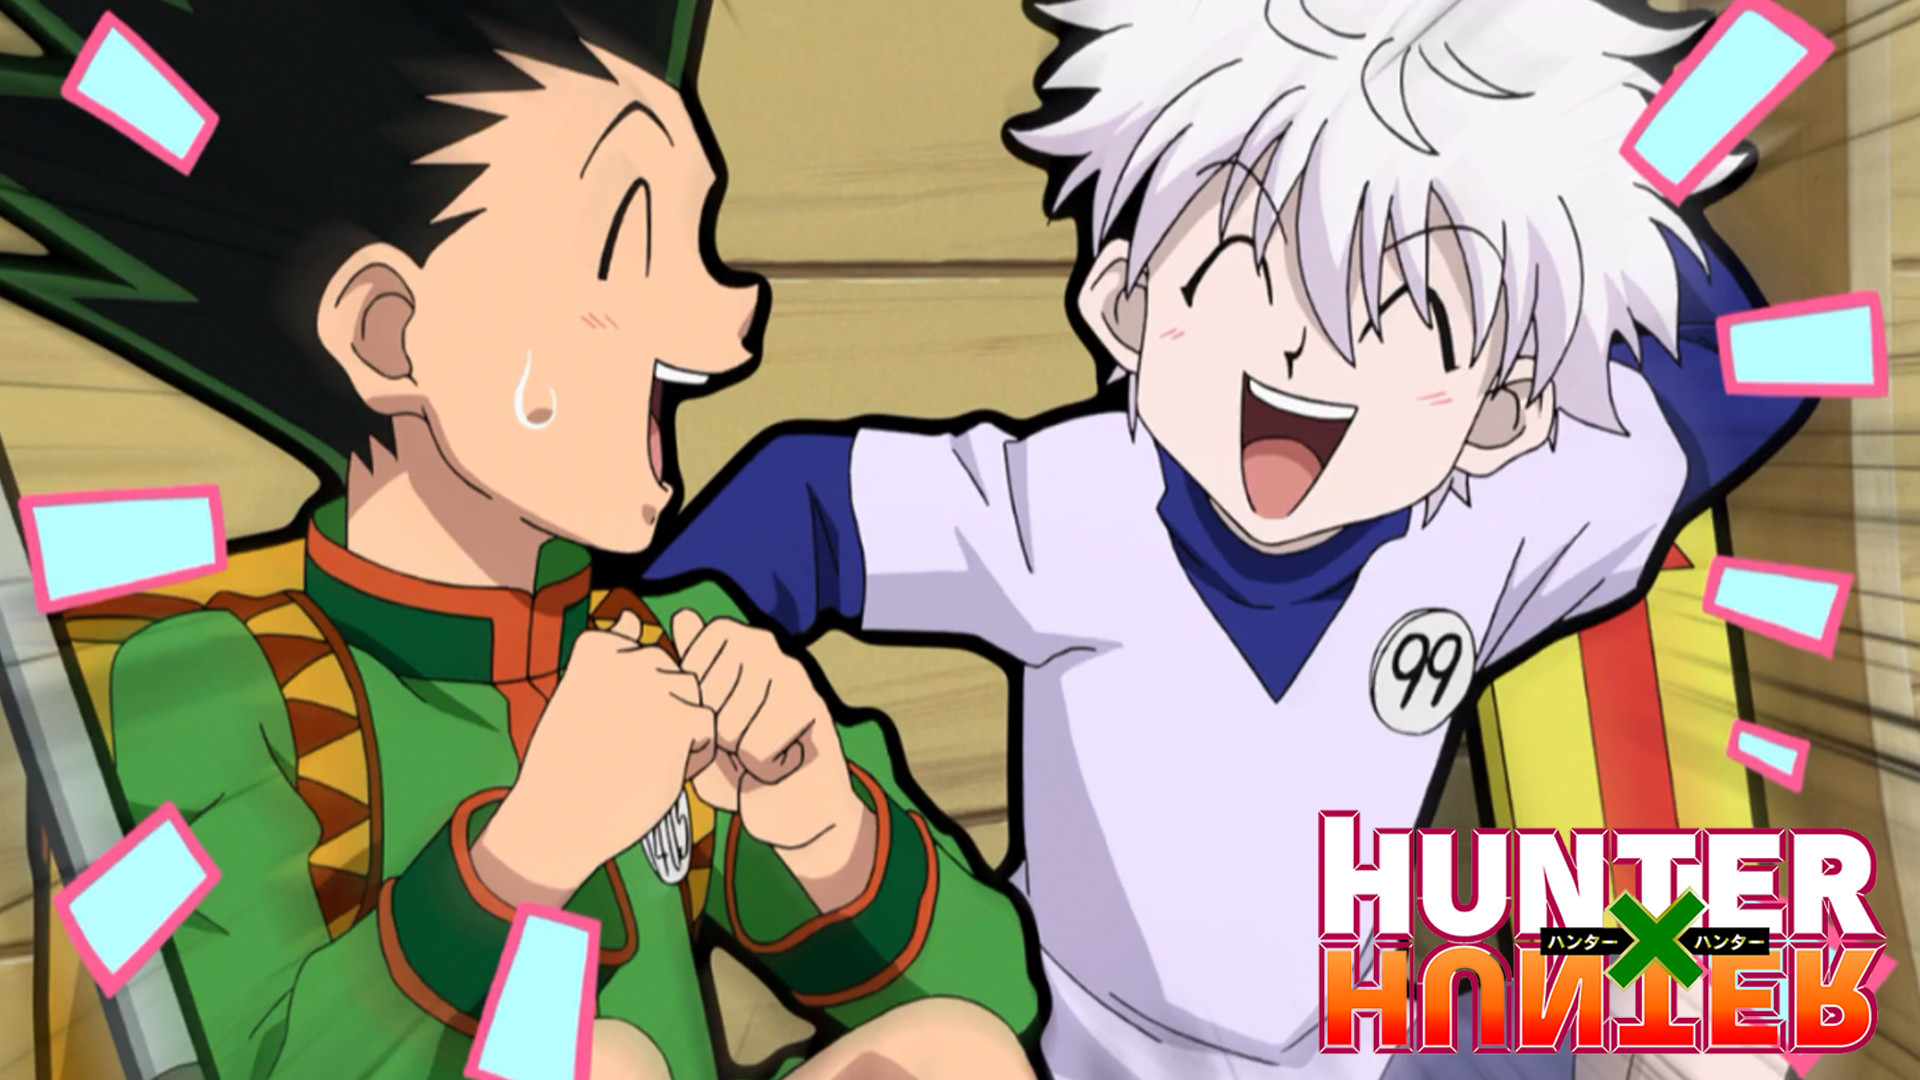 Killua And Gon Wallpapers  Top 25 Best Killua And Gon Wallpapers Download